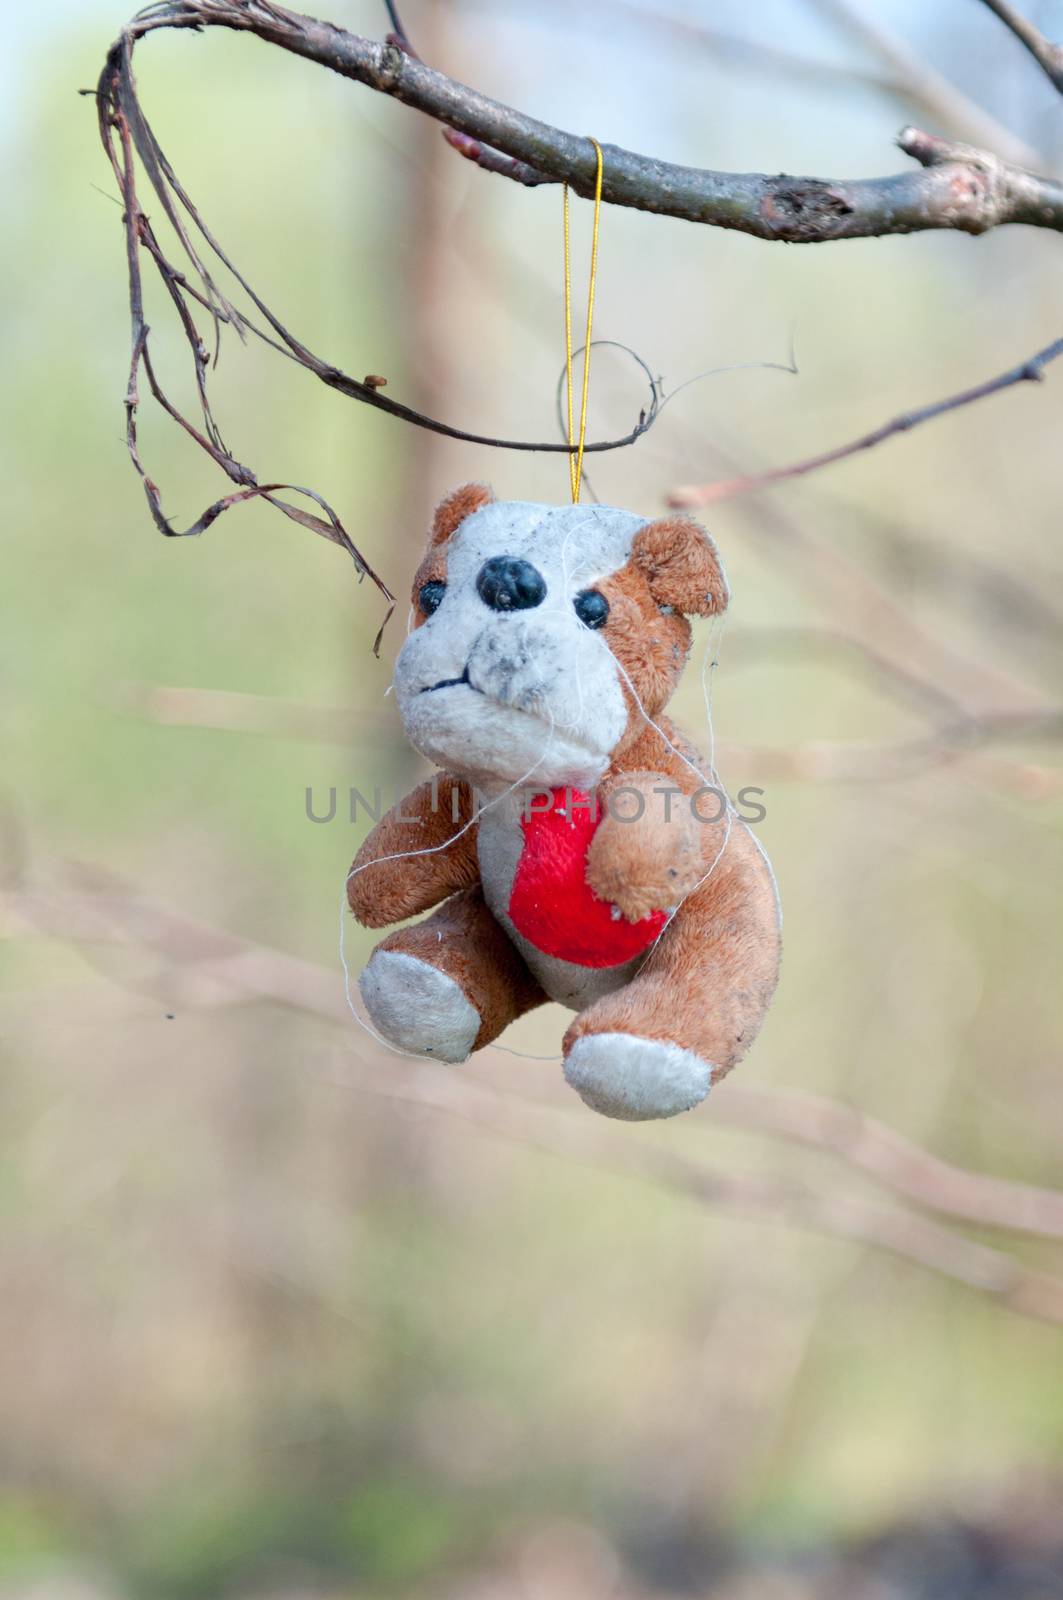 Vintage toy dog, stuffed with straw, isolated on green background.